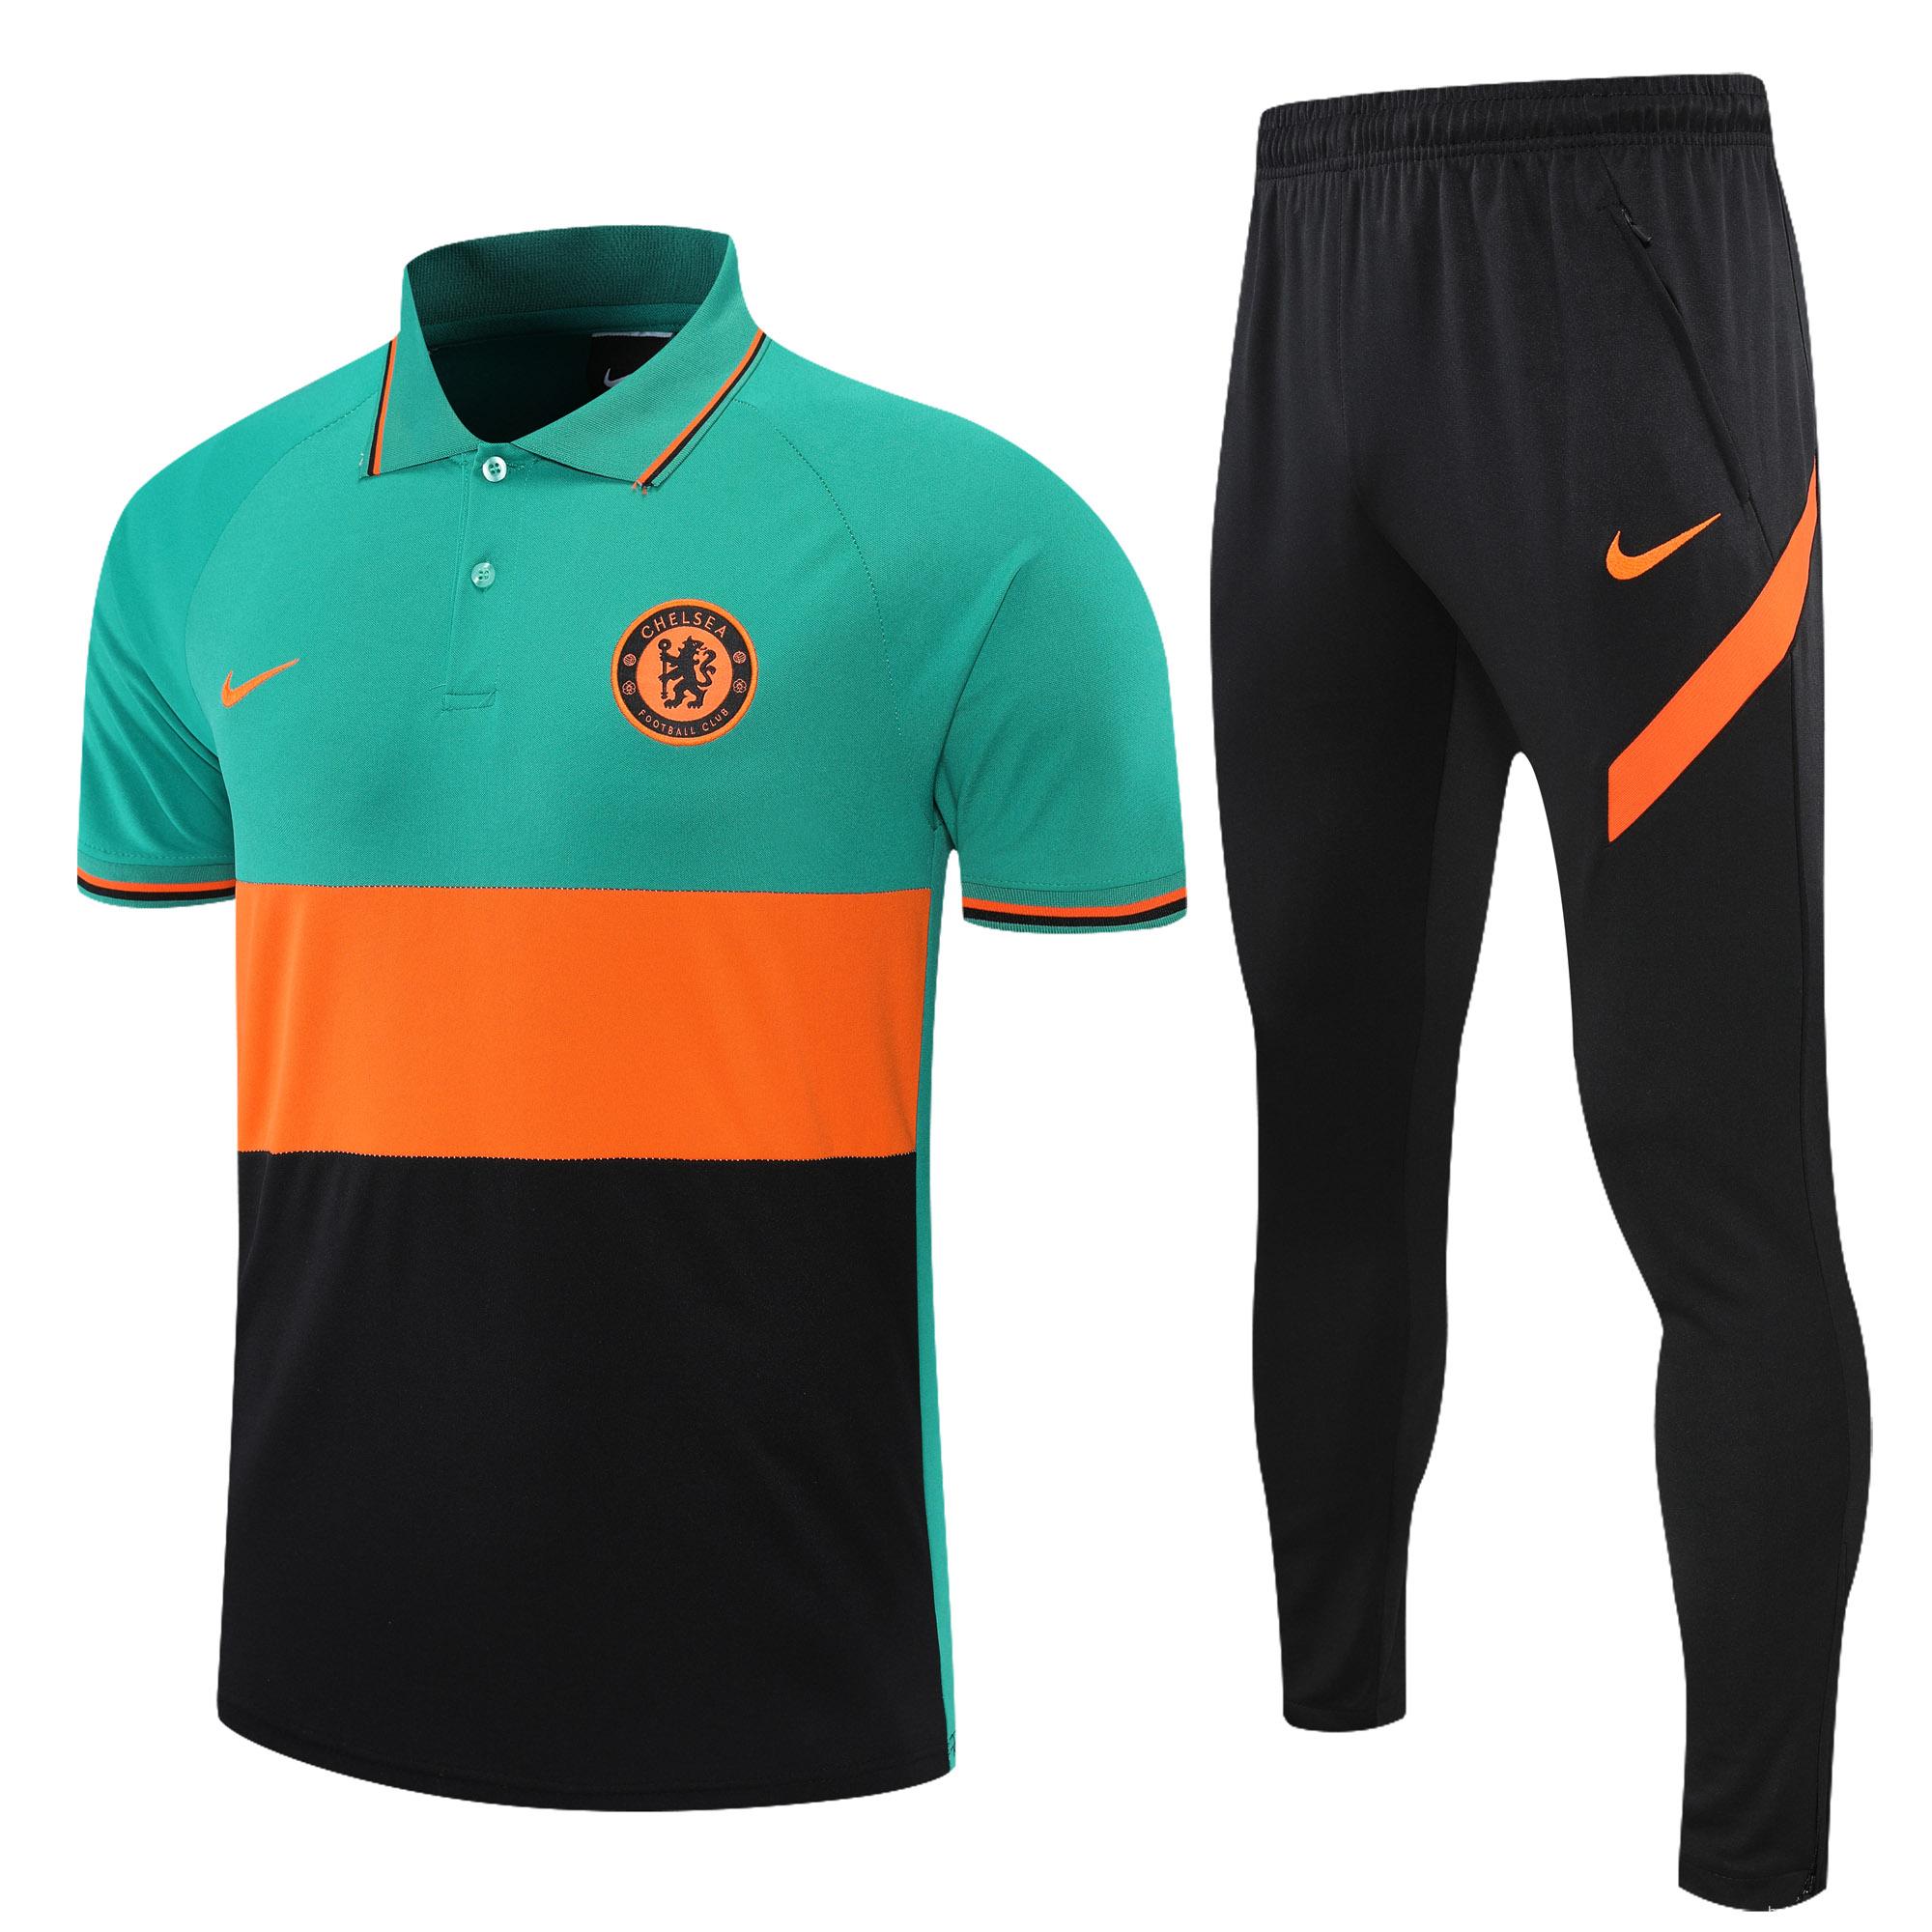 Chelsea POLO kit black orange green (not supported to be sold separately)